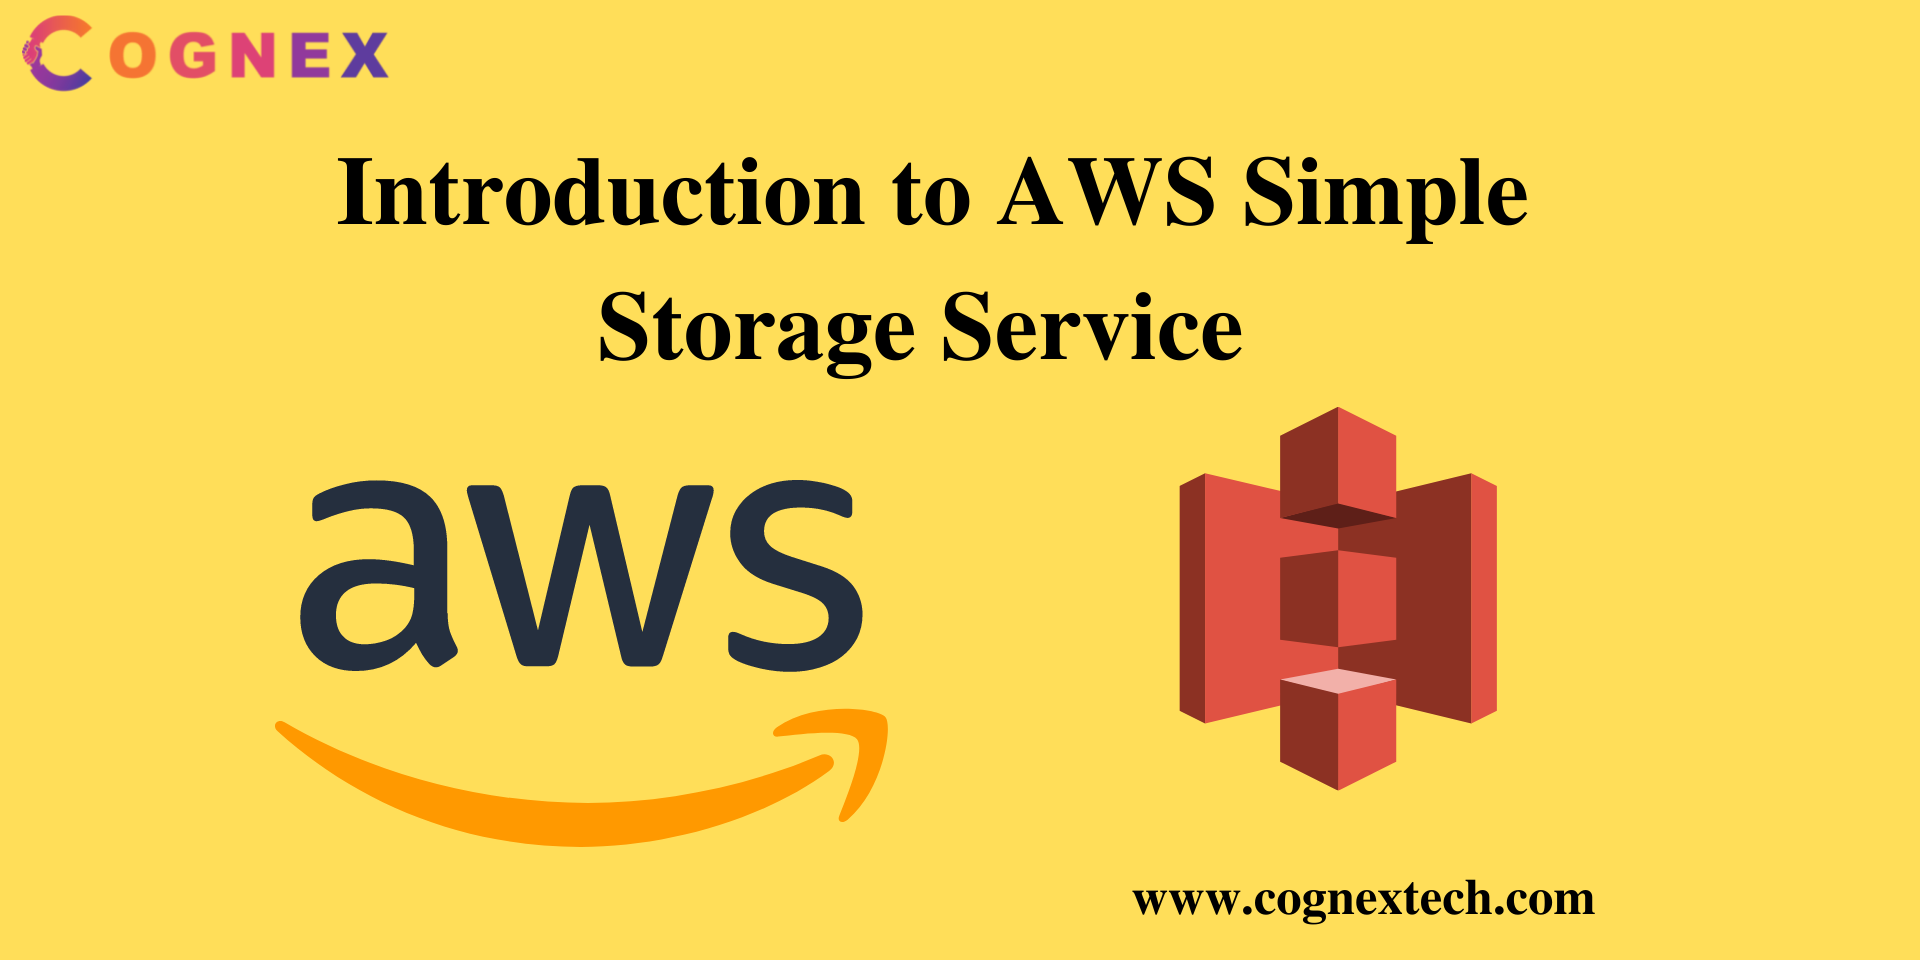 Introduction to AWS simple storage service